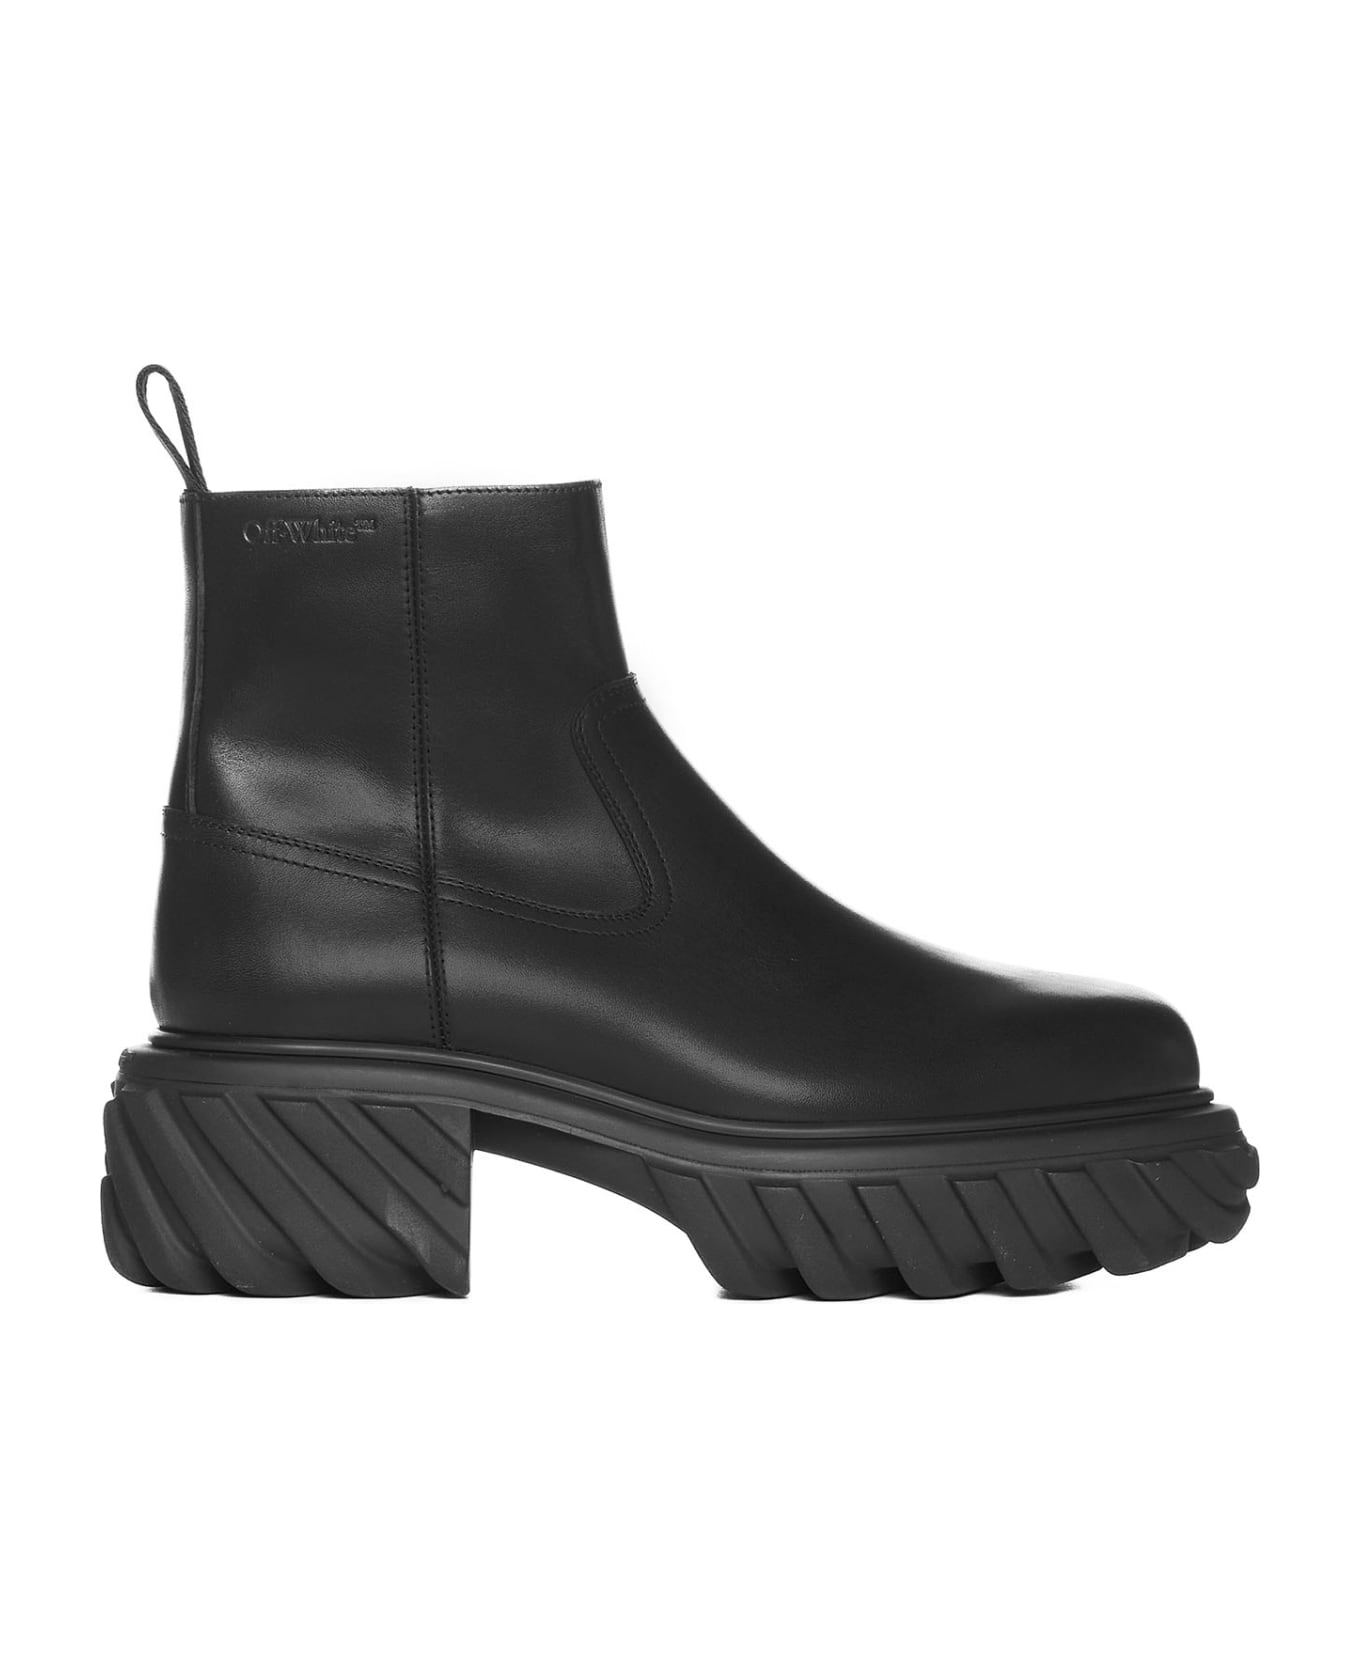 Off-White Tractor Motor Ankle Boots - Black ブーツ